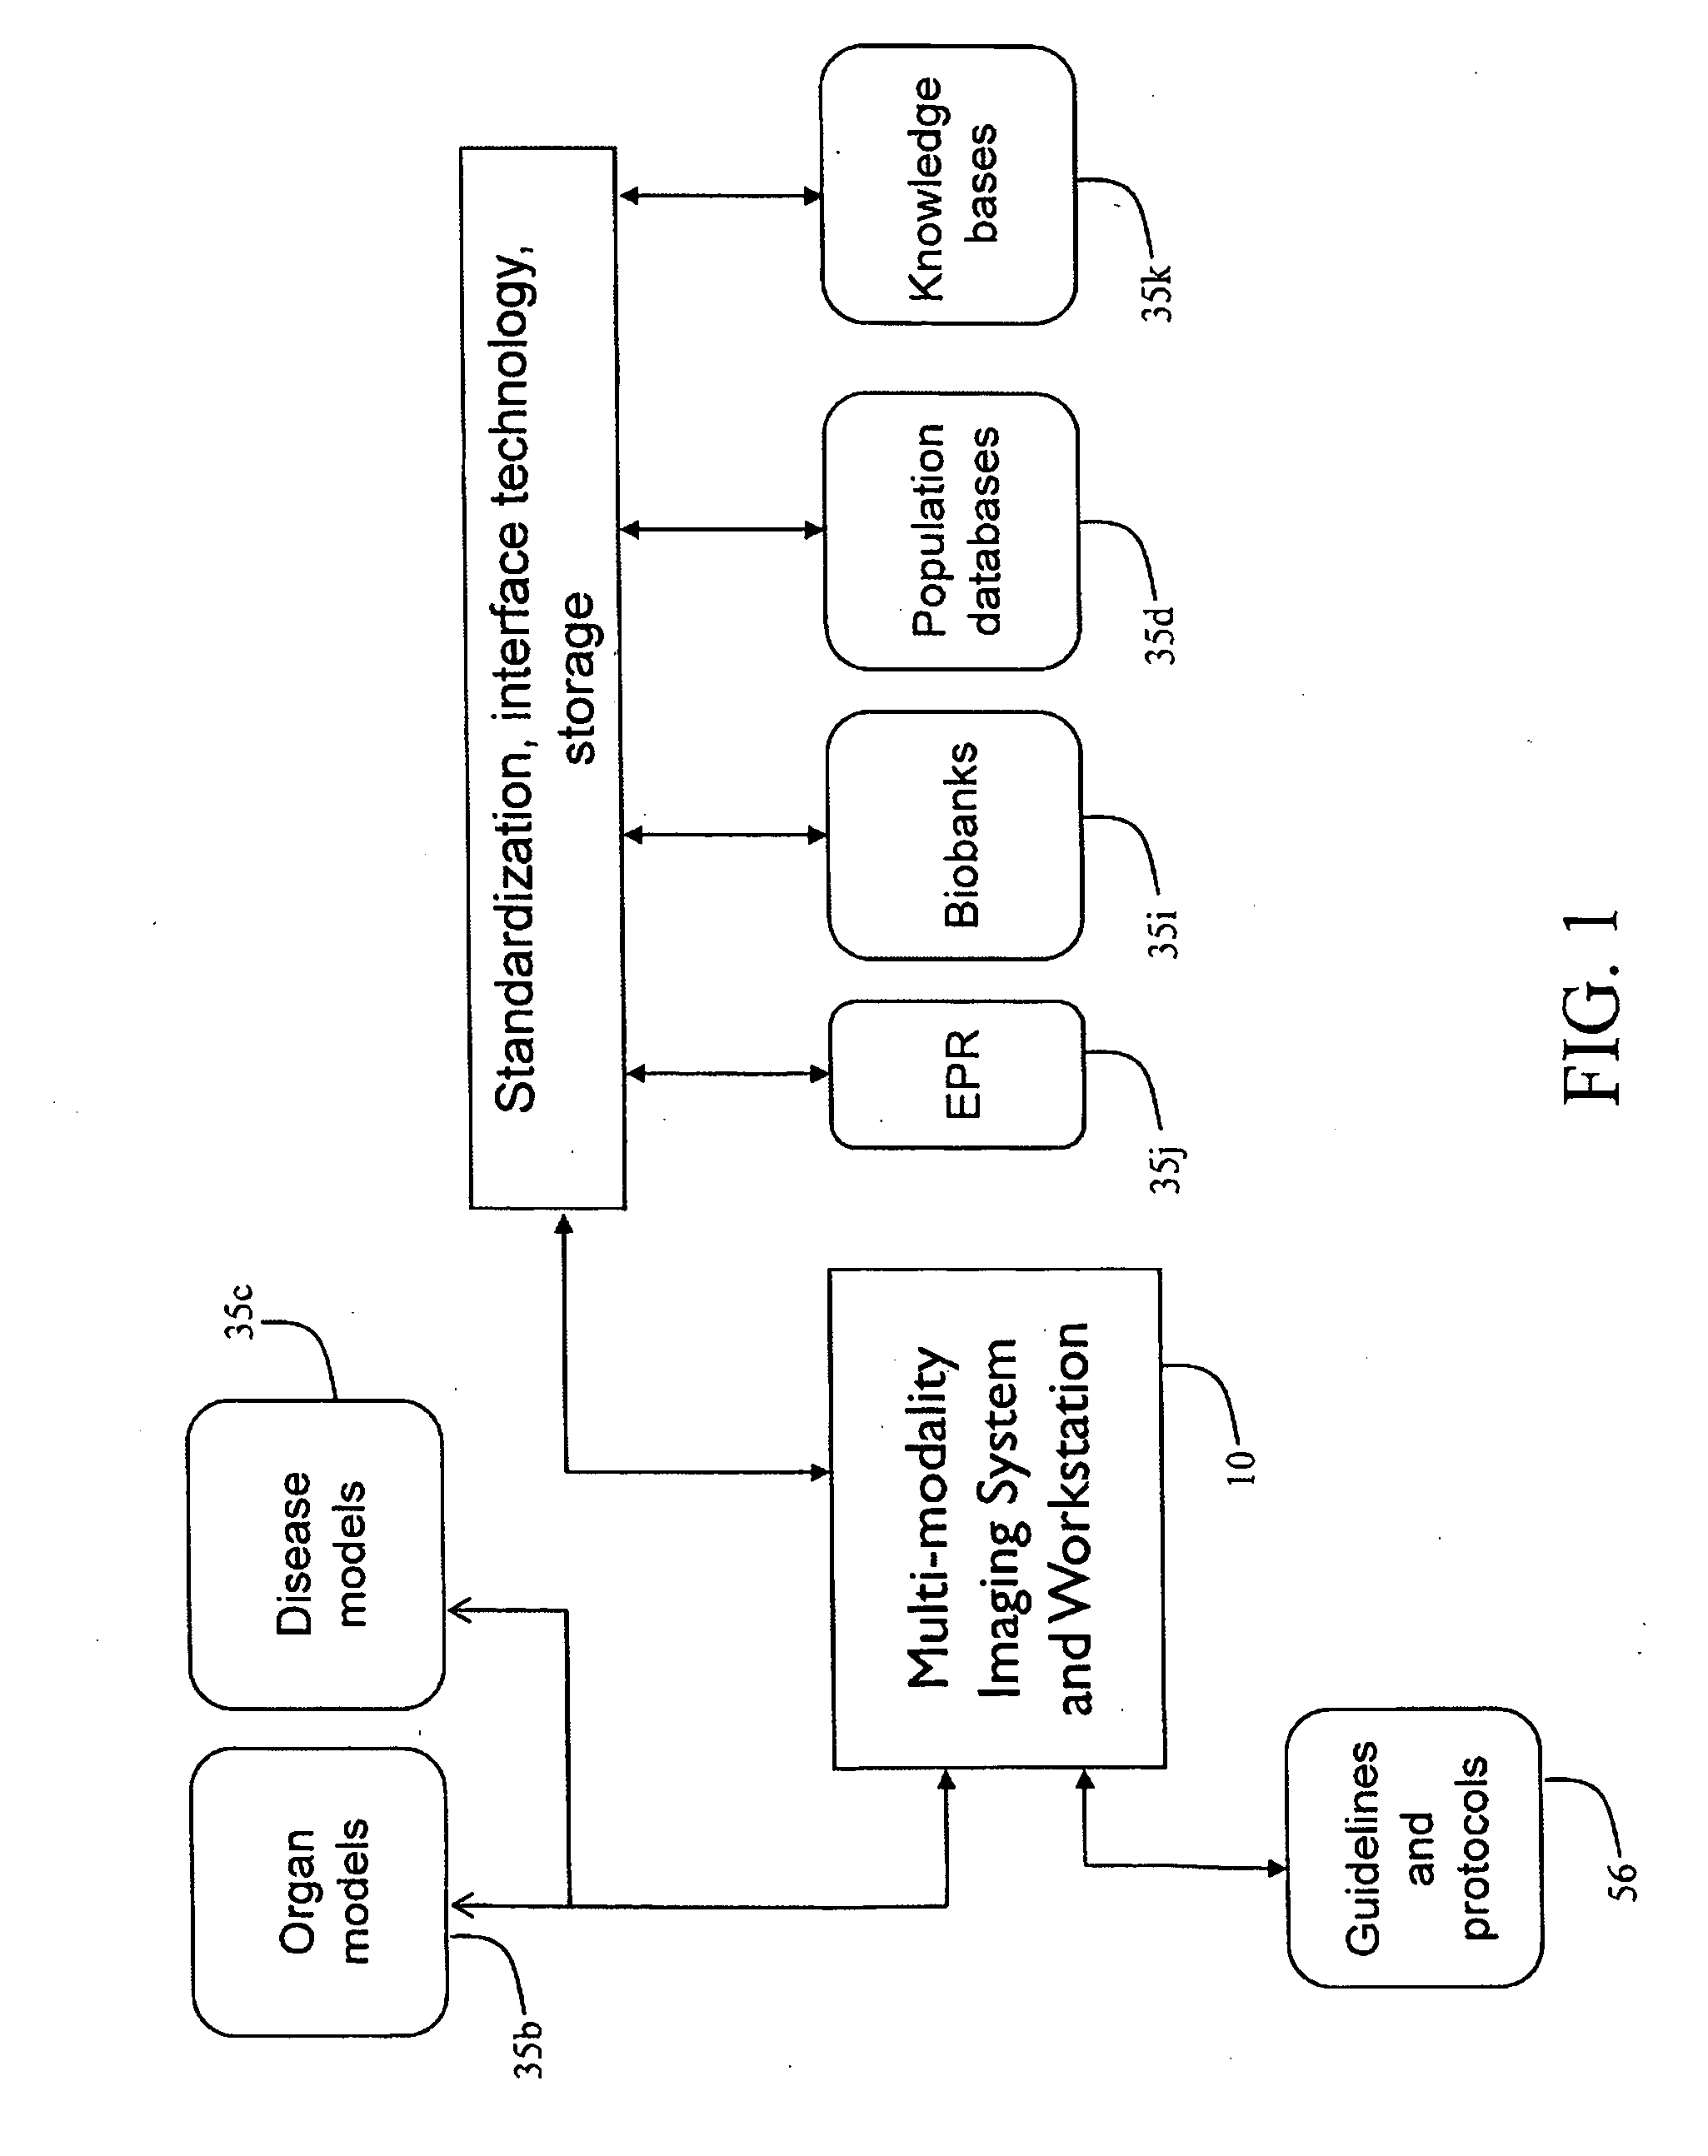 Multi-modal imaging system and workstation with support for structured hypothesis testing